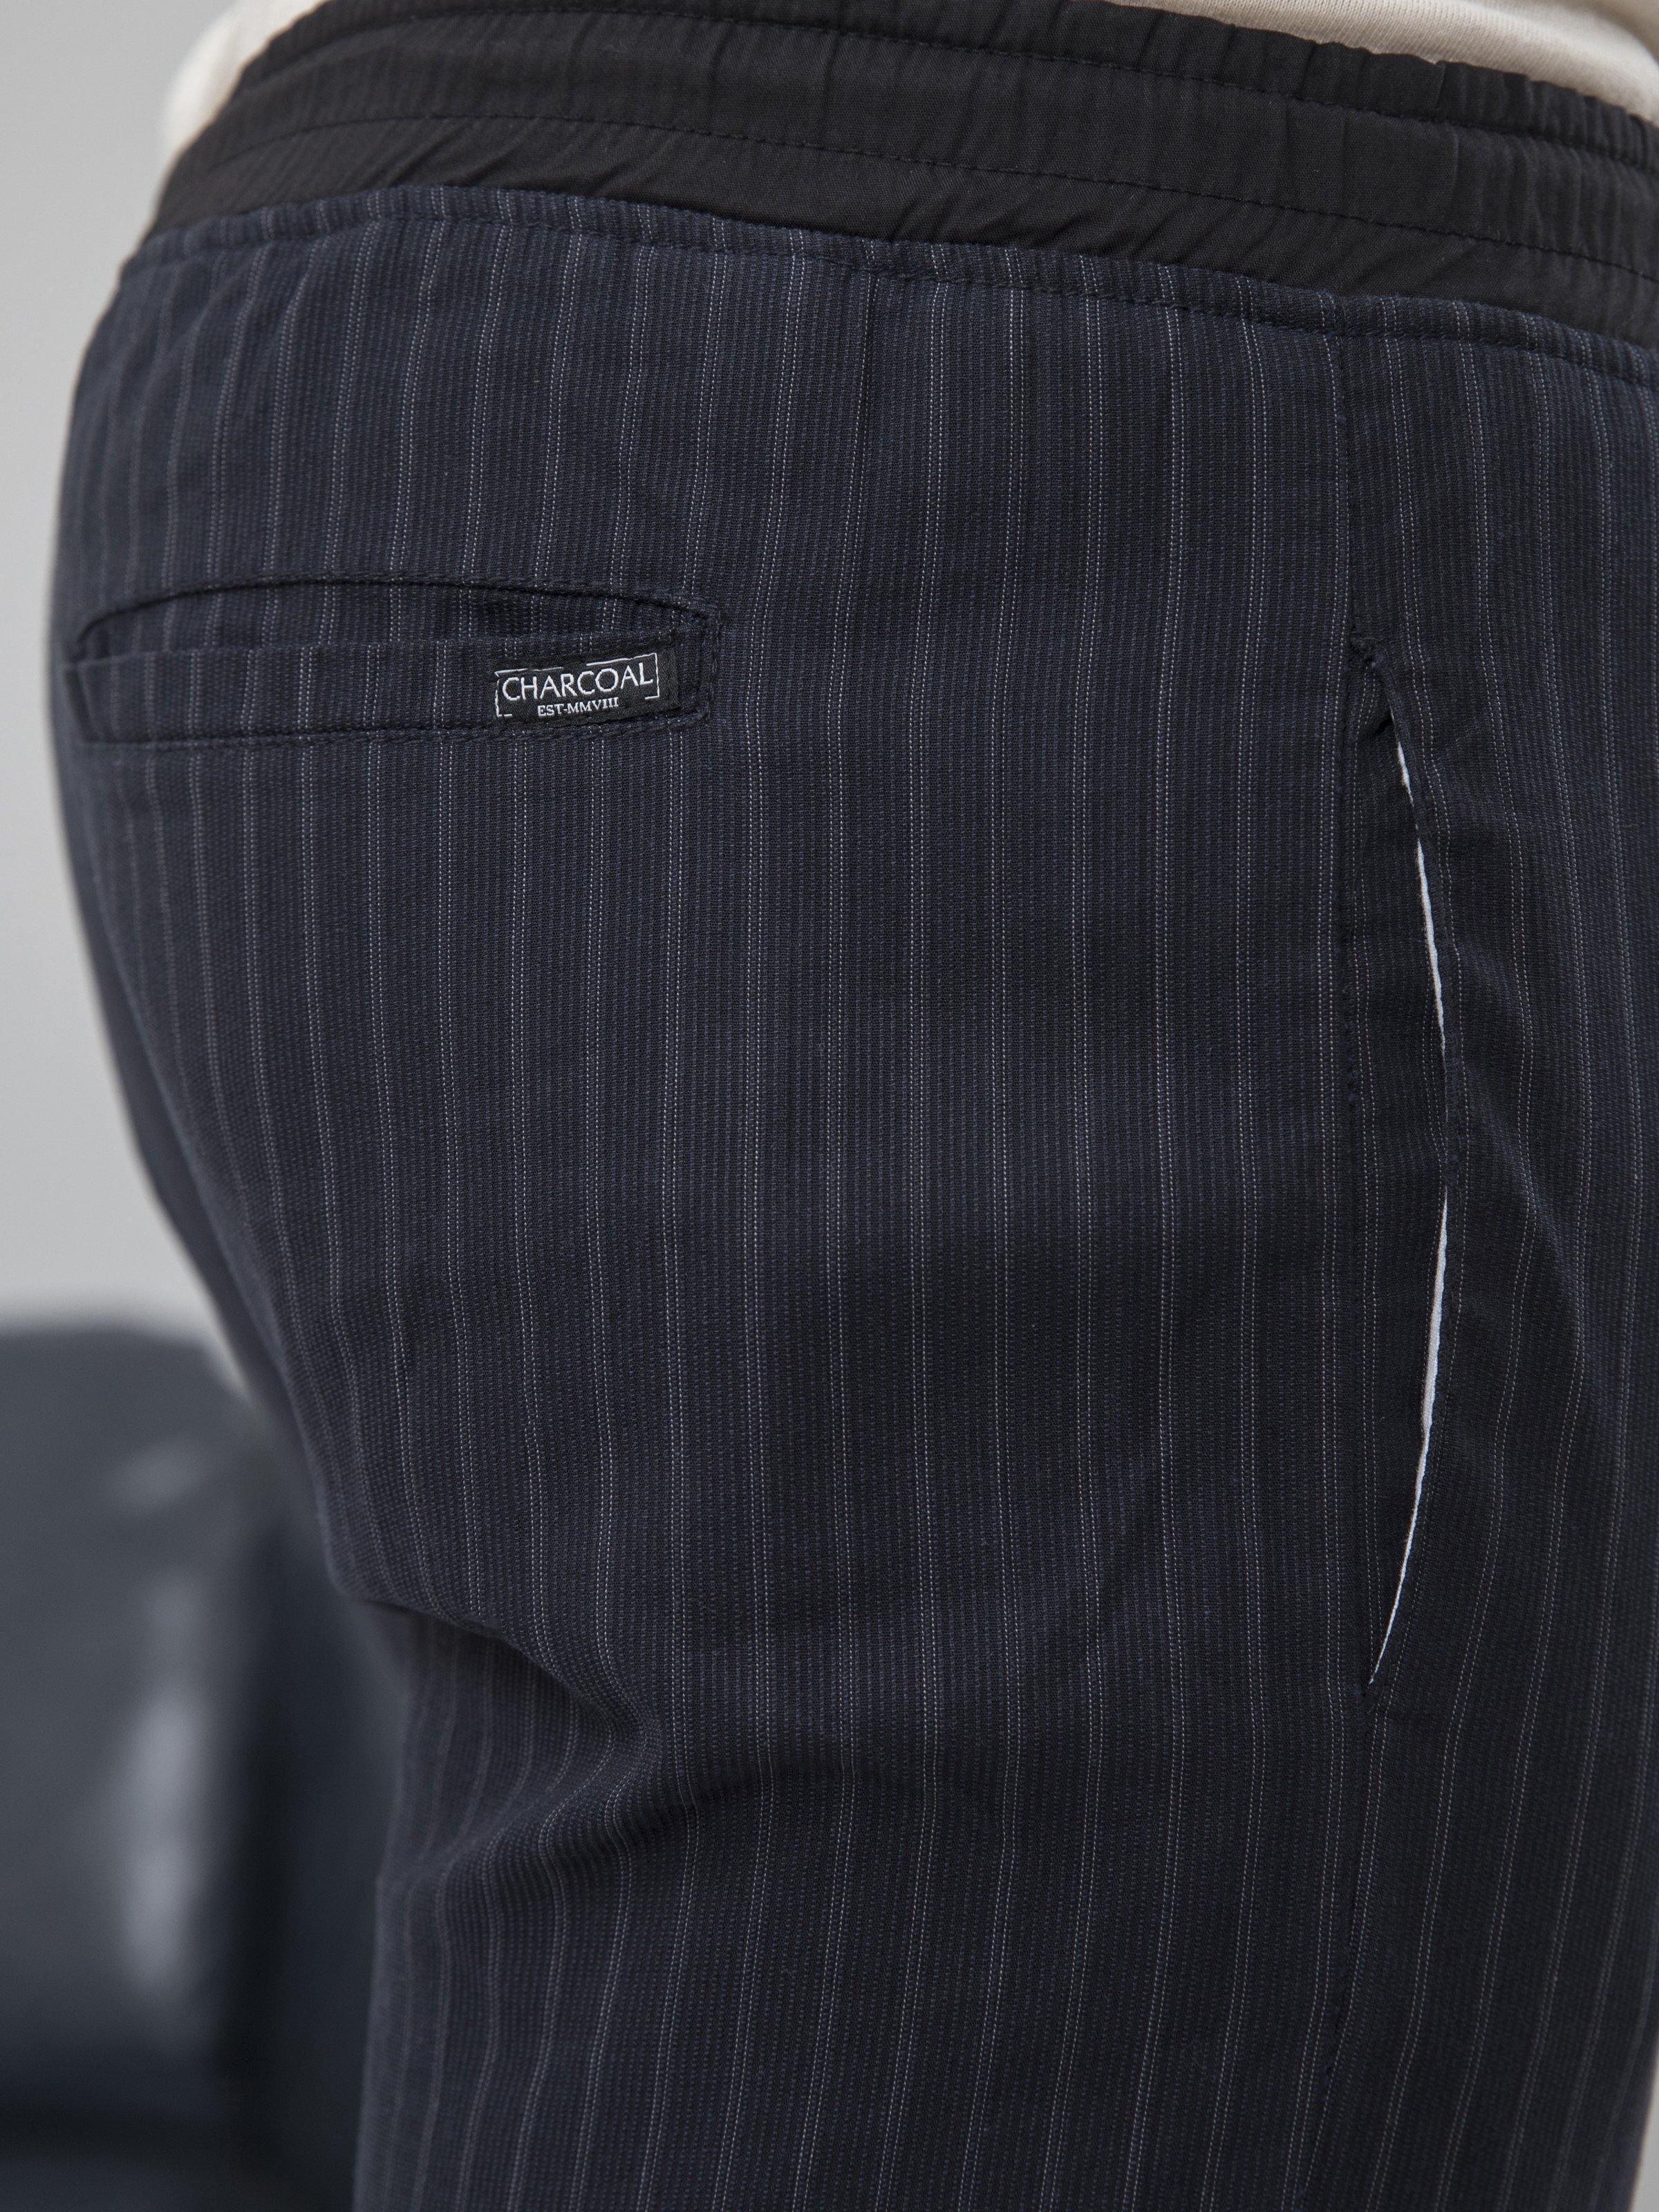 CASUAL TROUSER TAPERED FIT CHARCOAL GREY at Charcoal Clothing